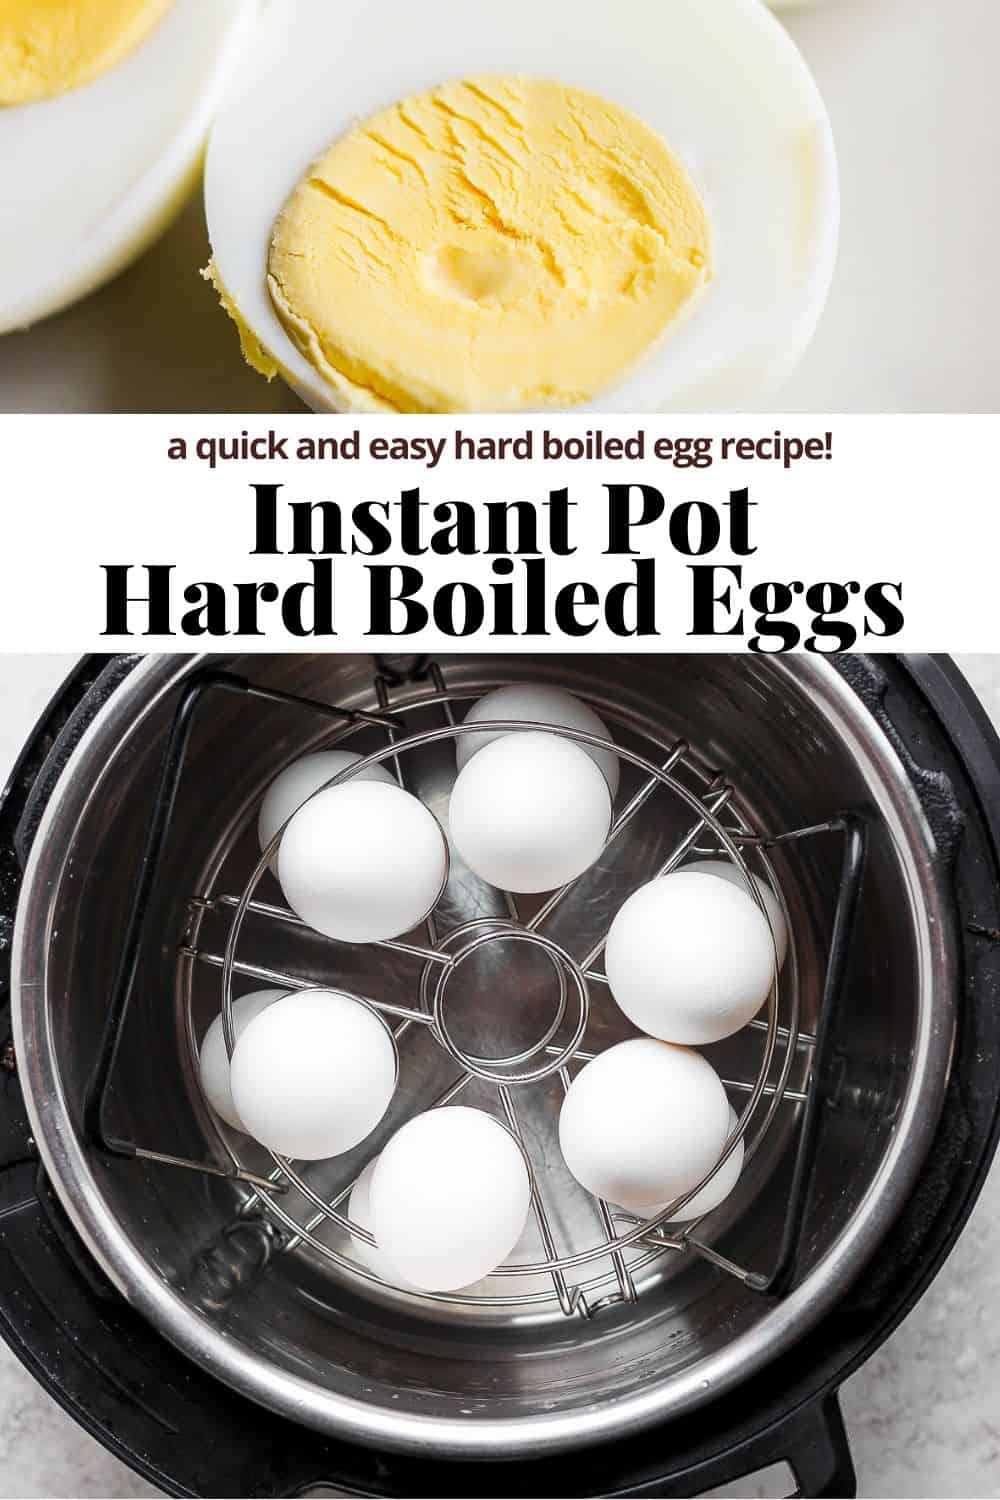 A close up image of a sliced hard boiled egg, the recipe title, and then the eggs loaded into the egg insert inside the instant pot. 